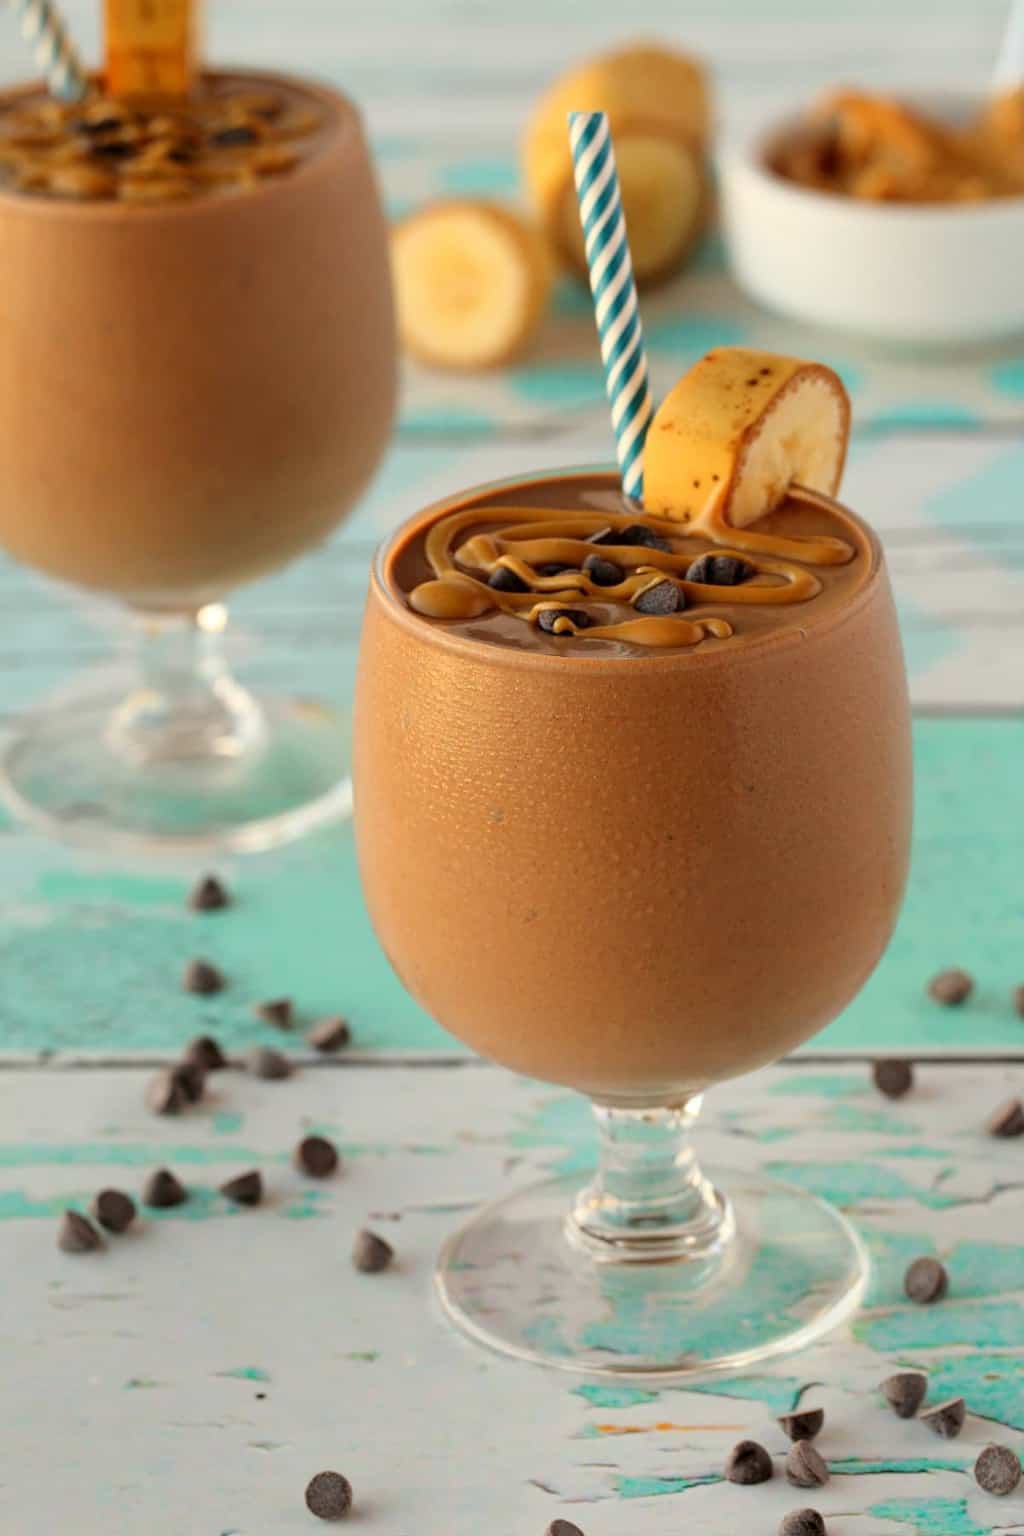 Chocolate peanut butter smoothie in a glass with a blue and white striped straw.